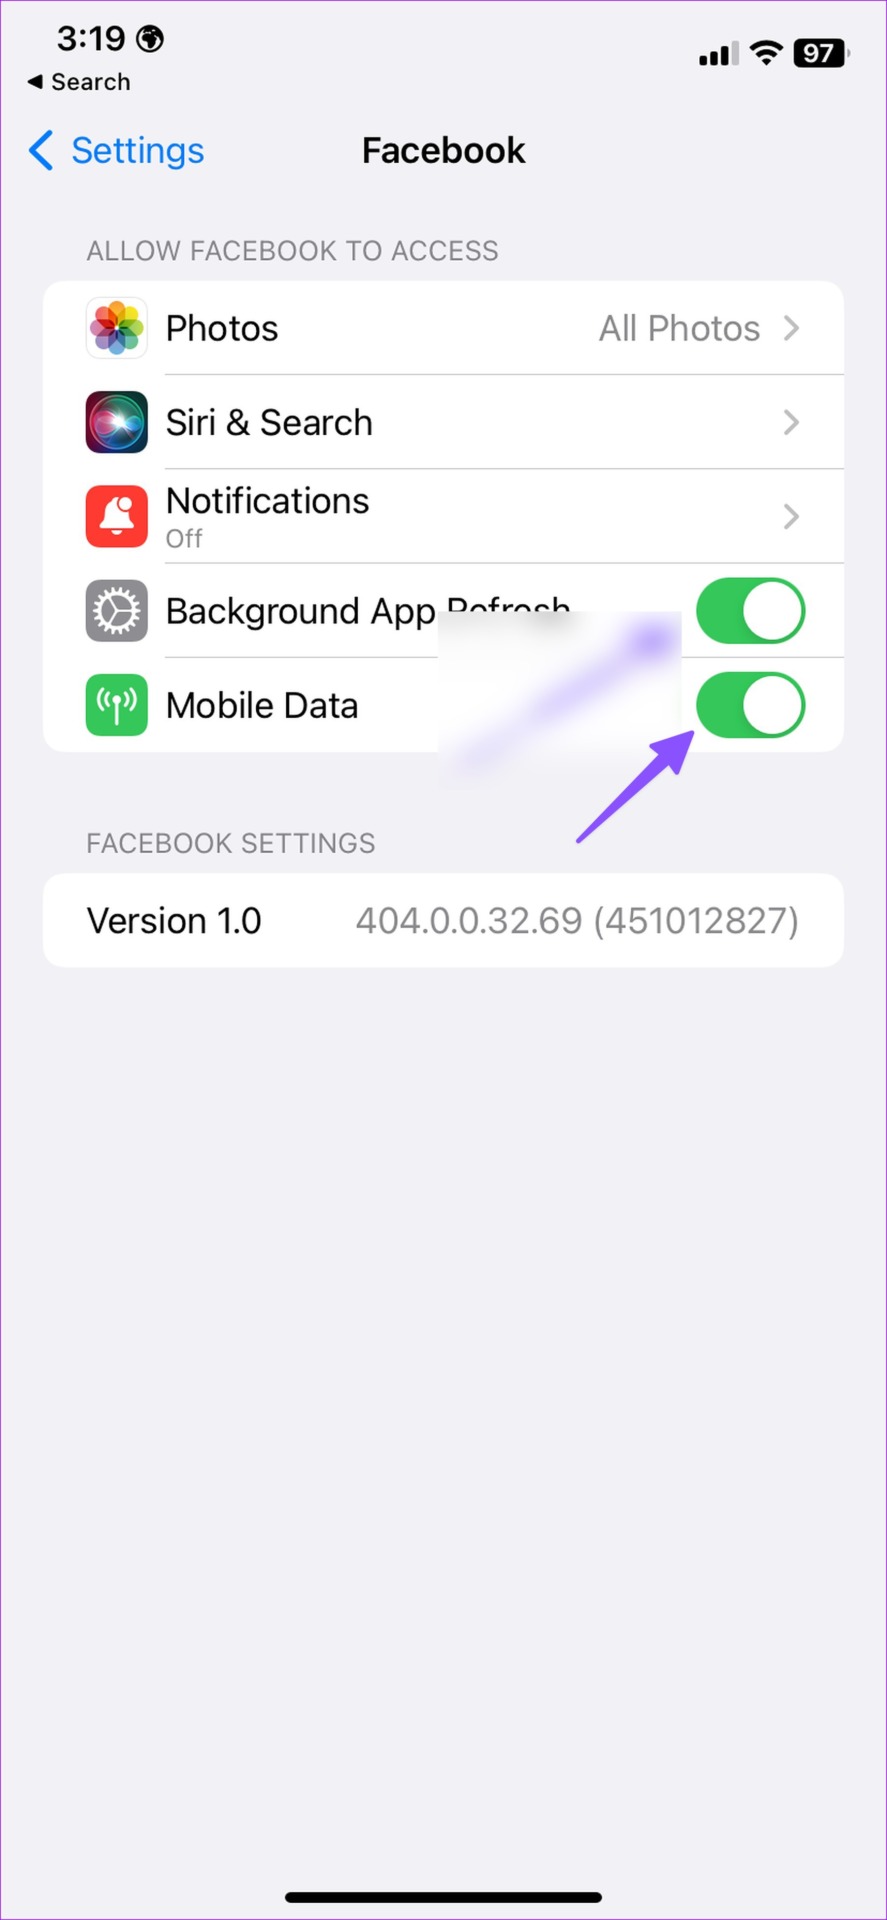 Enable mobile data for Facebook